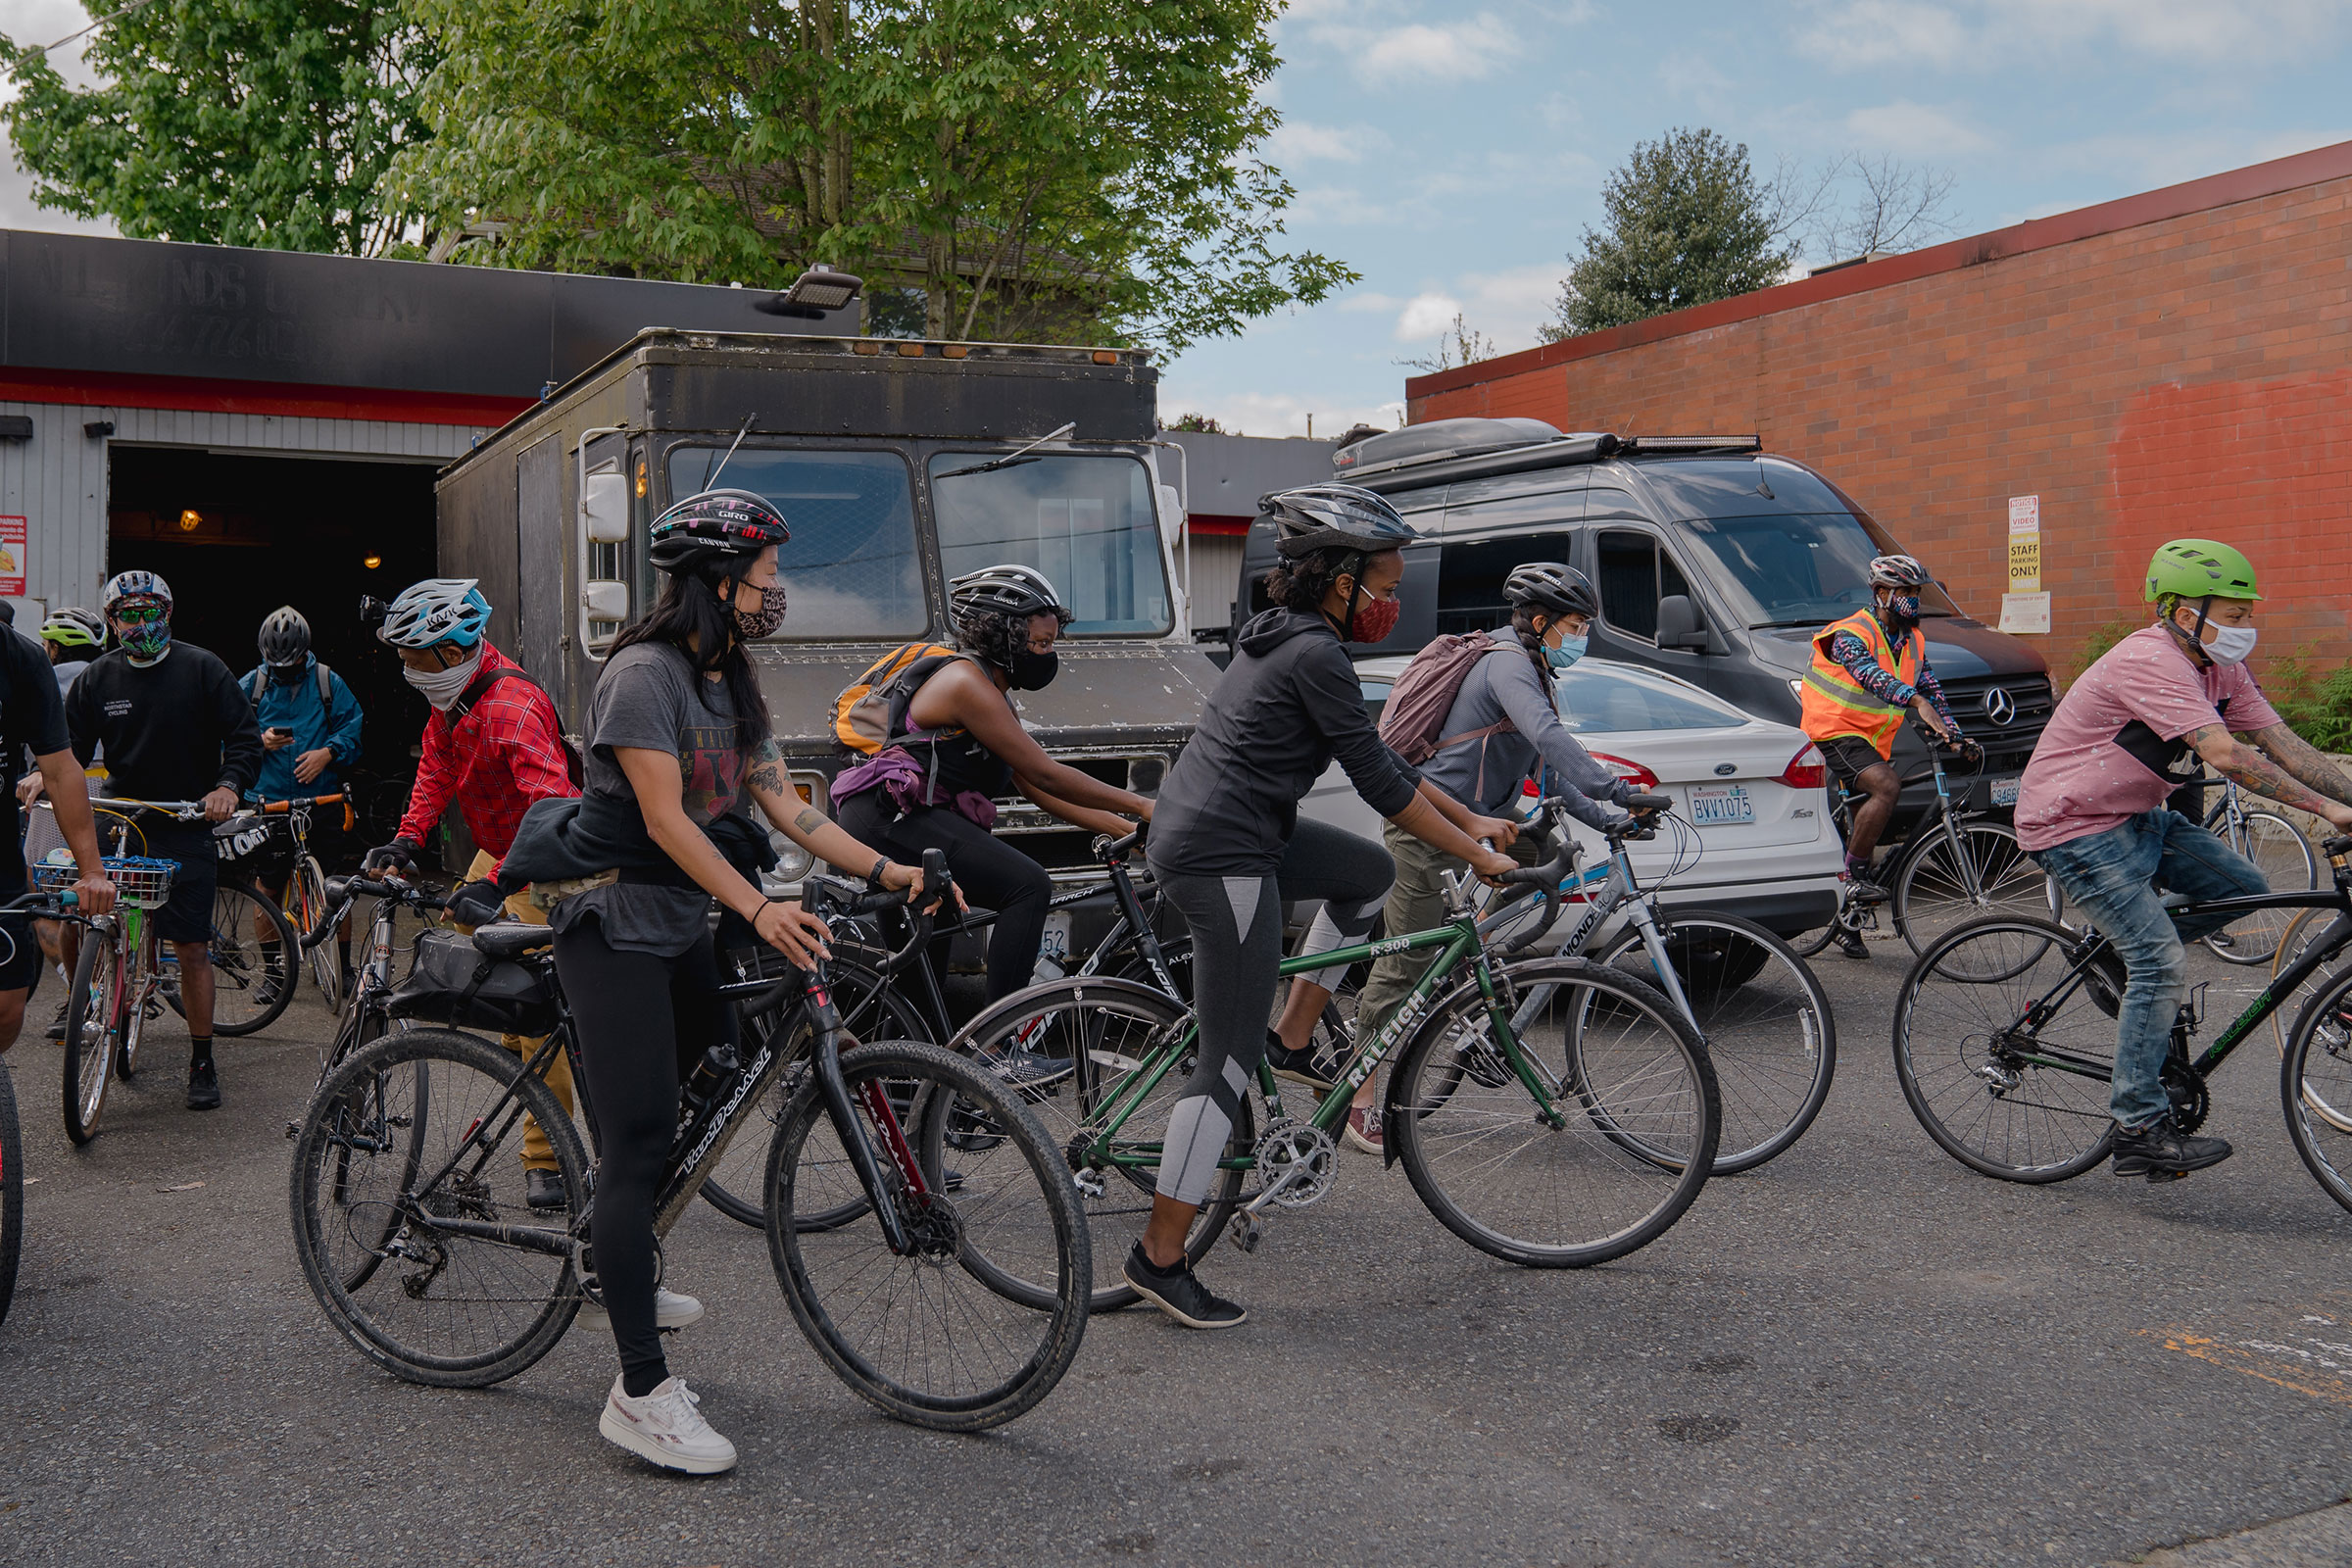 The NorthStar Cycling Club leaves the Central District in Seattle, to ride to Gas Works Park. (Jovelle Tamayo for TIME)